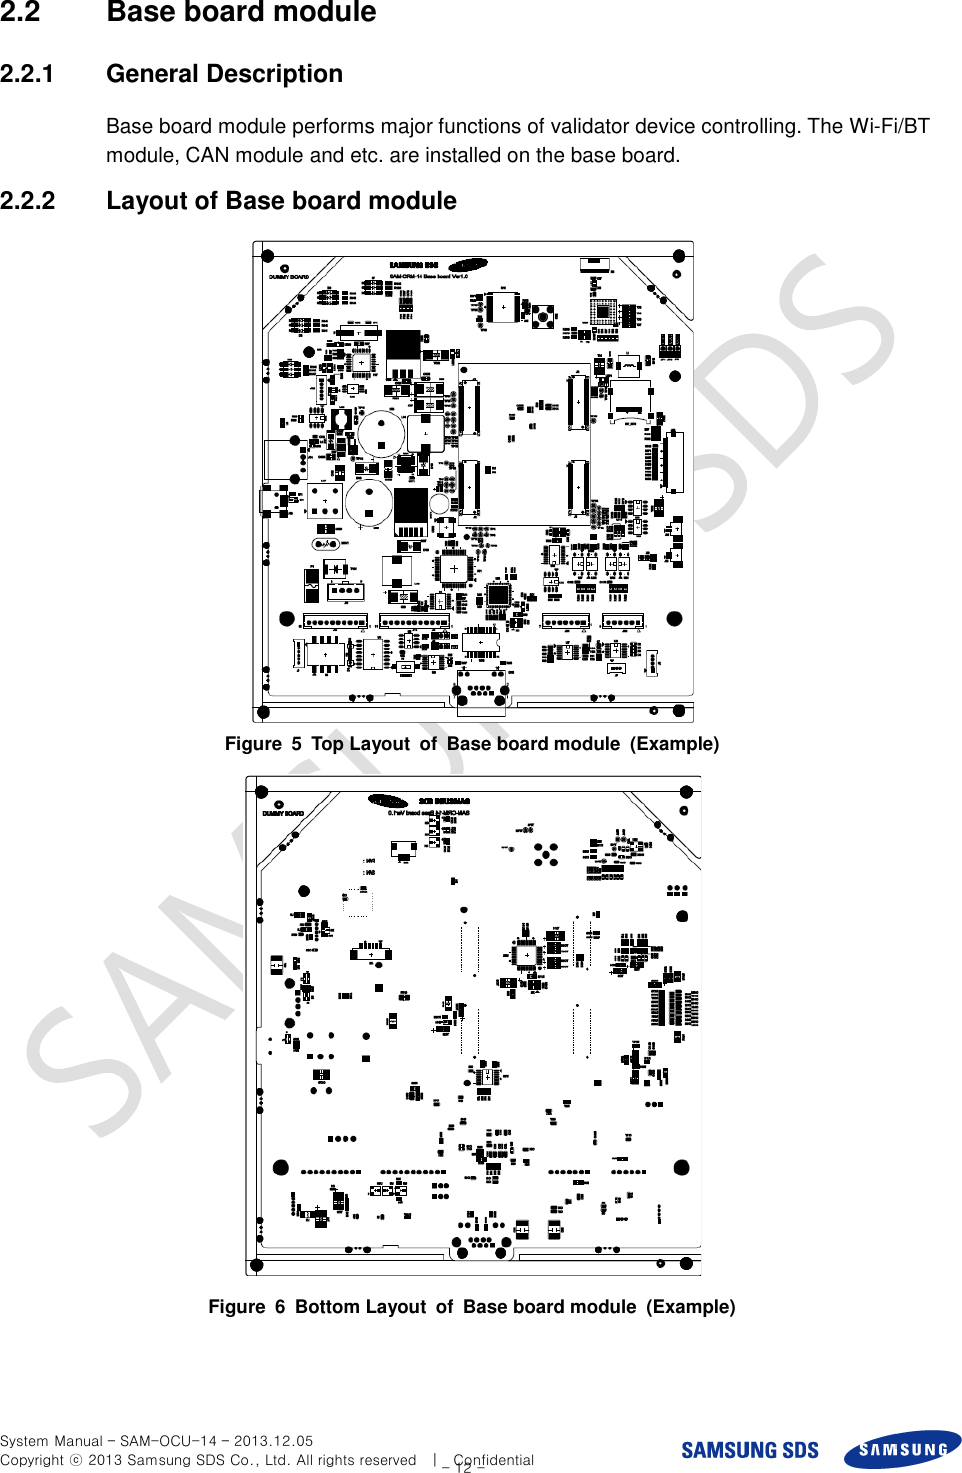  System Manual – SAM-OCU-14 – 2013.12.05 Copyright ⓒ 2013 Samsung SDS Co., Ltd. All rights reserved    |    Confidential - 12 - 2.2  Base board module 2.2.1  General Description Base board module performs major functions of validator device controlling. The Wi-Fi/BT module, CAN module and etc. are installed on the base board. 2.2.2  Layout of Base board module  Figure  5  Top Layout  of  Base board module  (Example)  Figure  6  Bottom Layout  of  Base board module  (Example)  